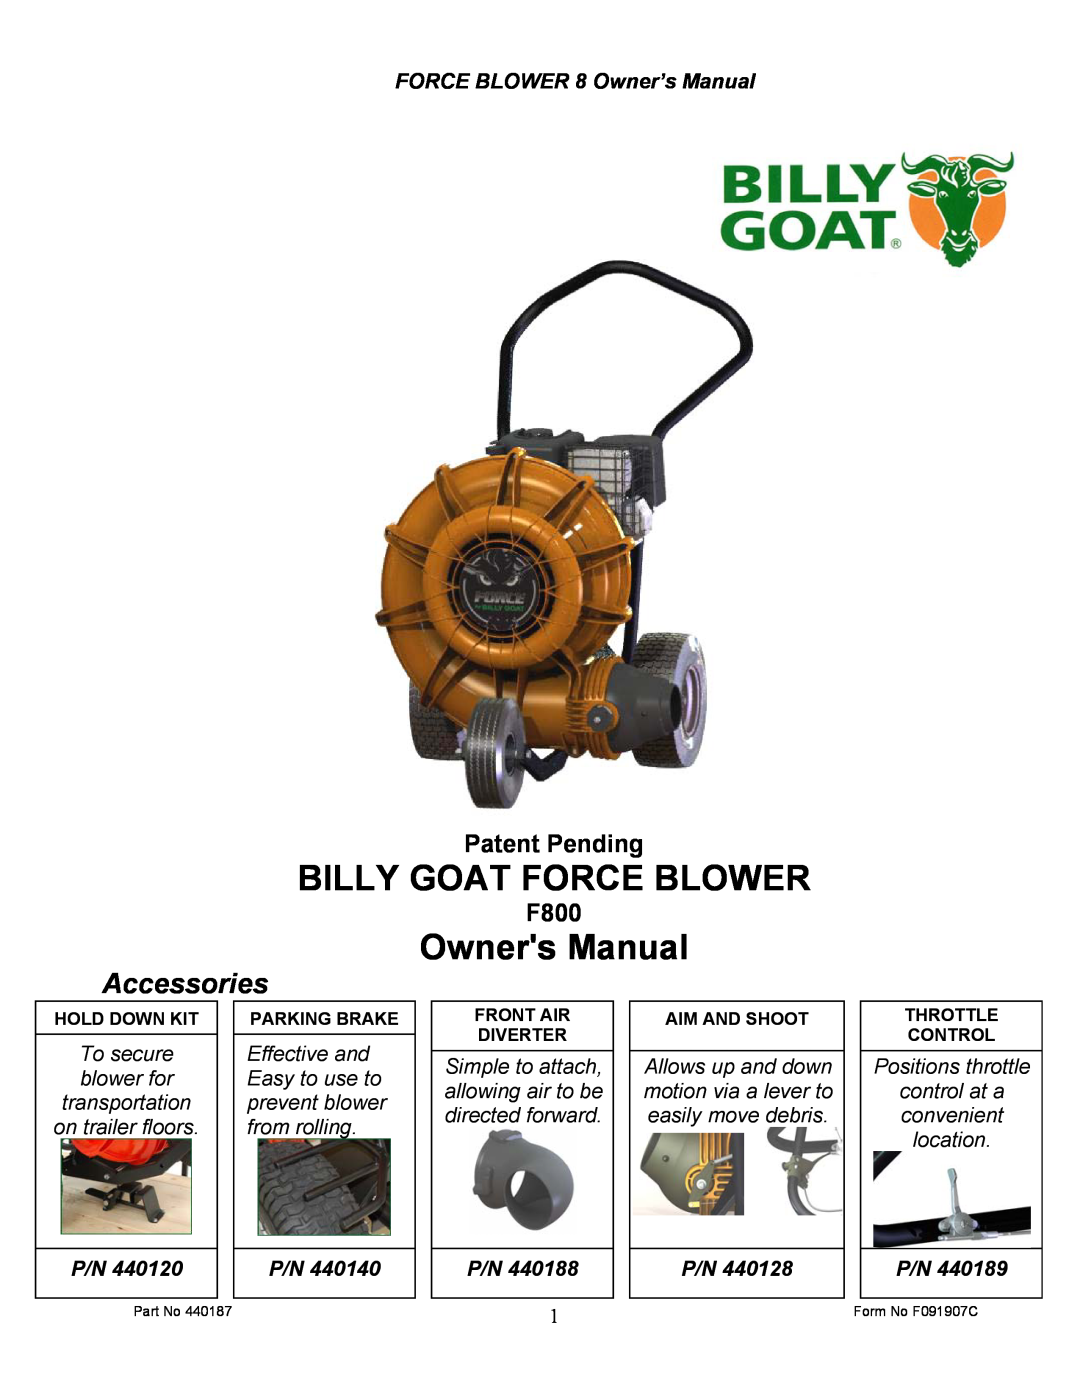 Billy Goat F800 owner manual Patent Pending, Billy Goat Force Blower, Accessories 